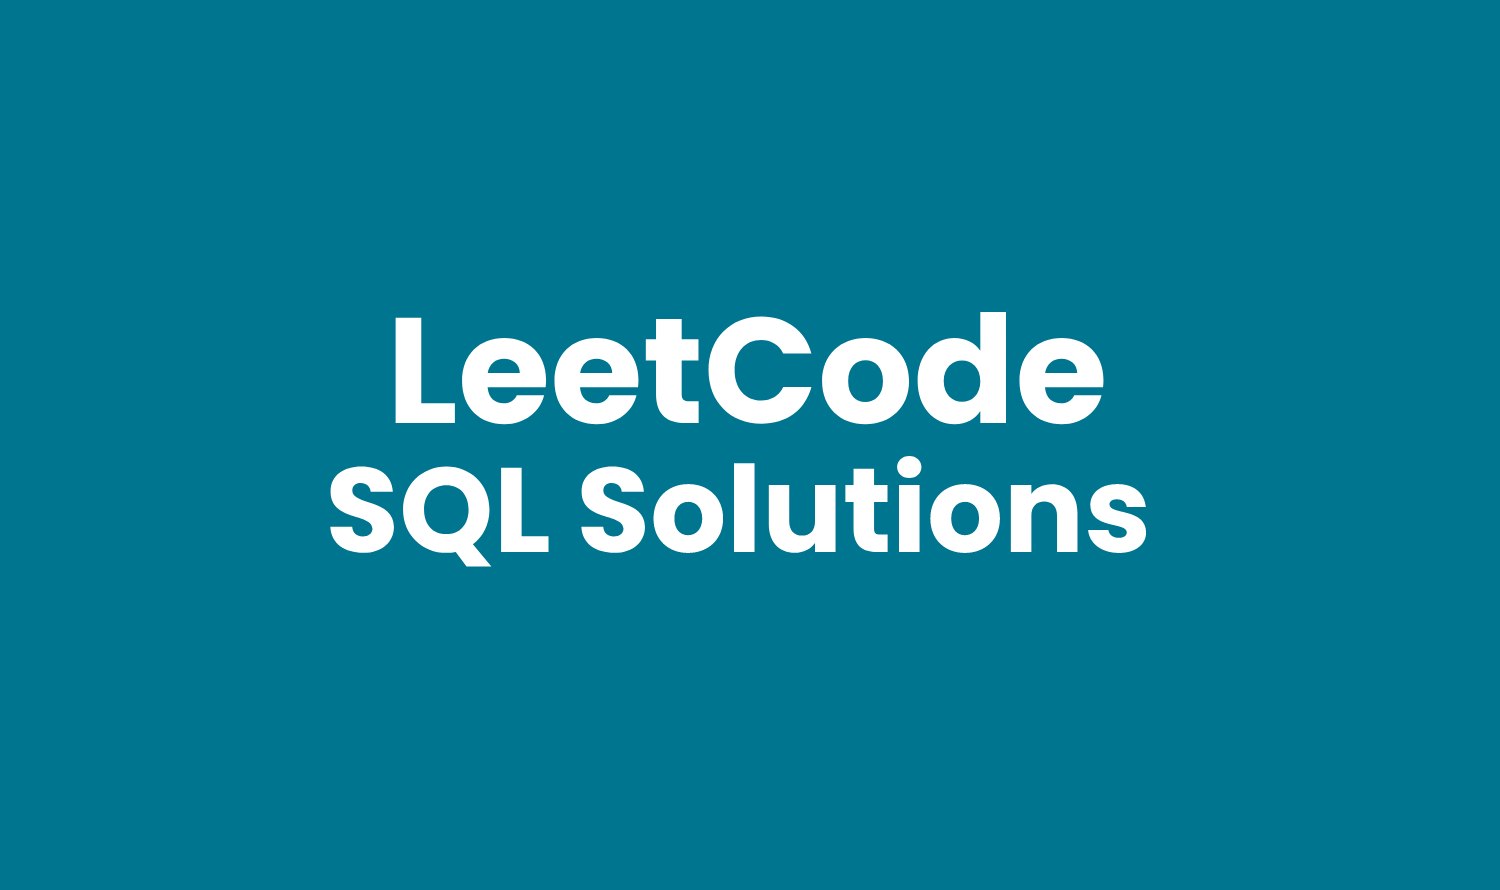 LeetCode SQL Problem Solving Questions With Solutions